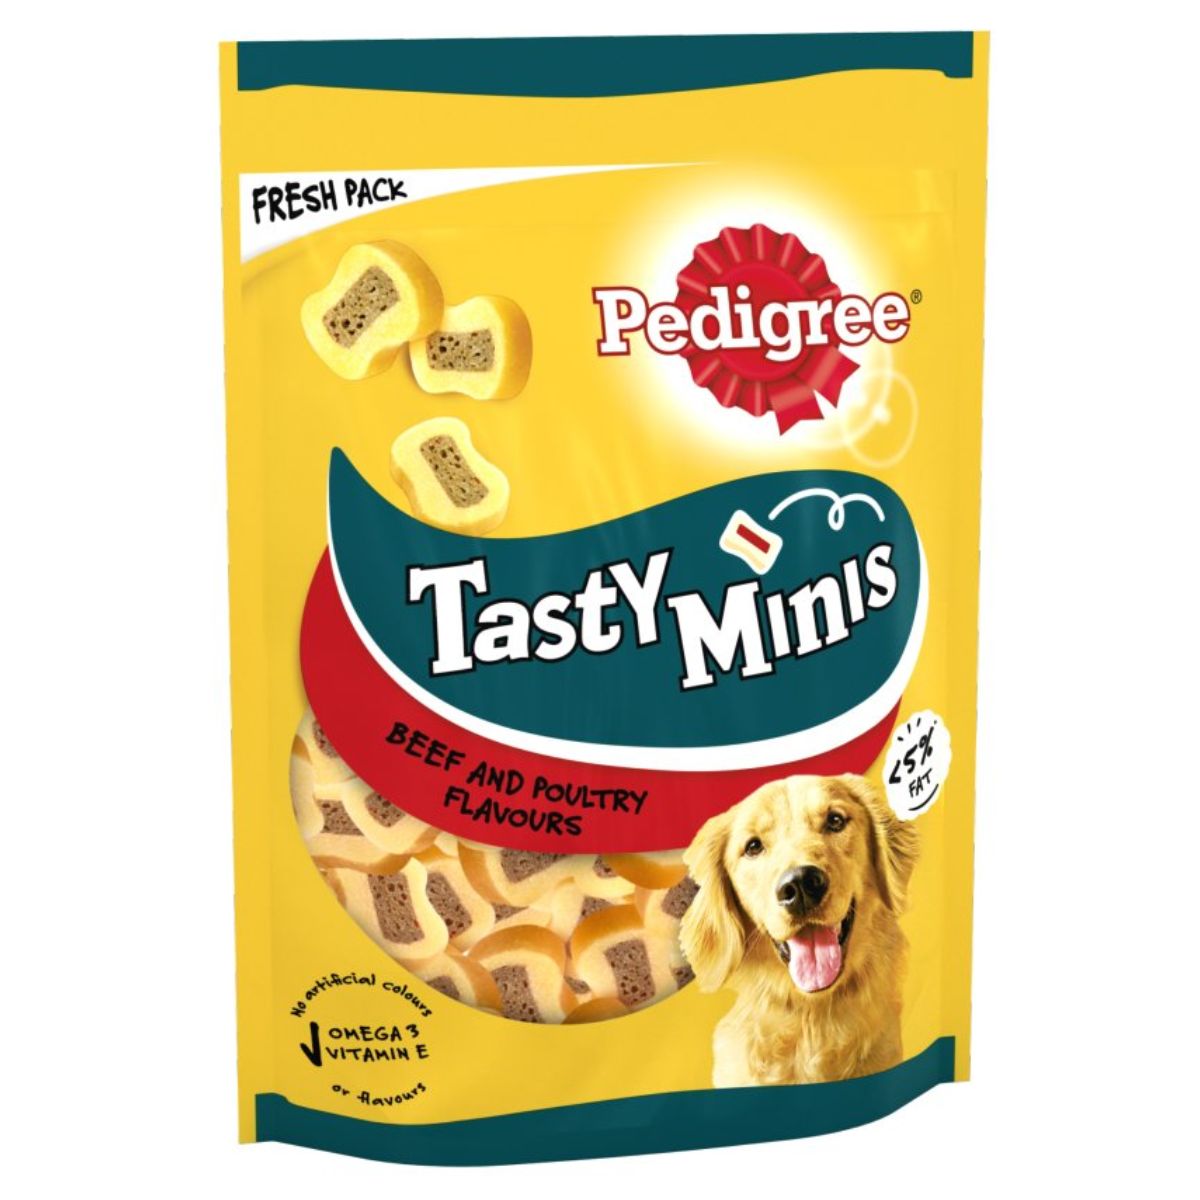 Pedigree - Tasty Minis Adult Dog Treats Beef & Poultry Chewy Slices - 155g dog treats.